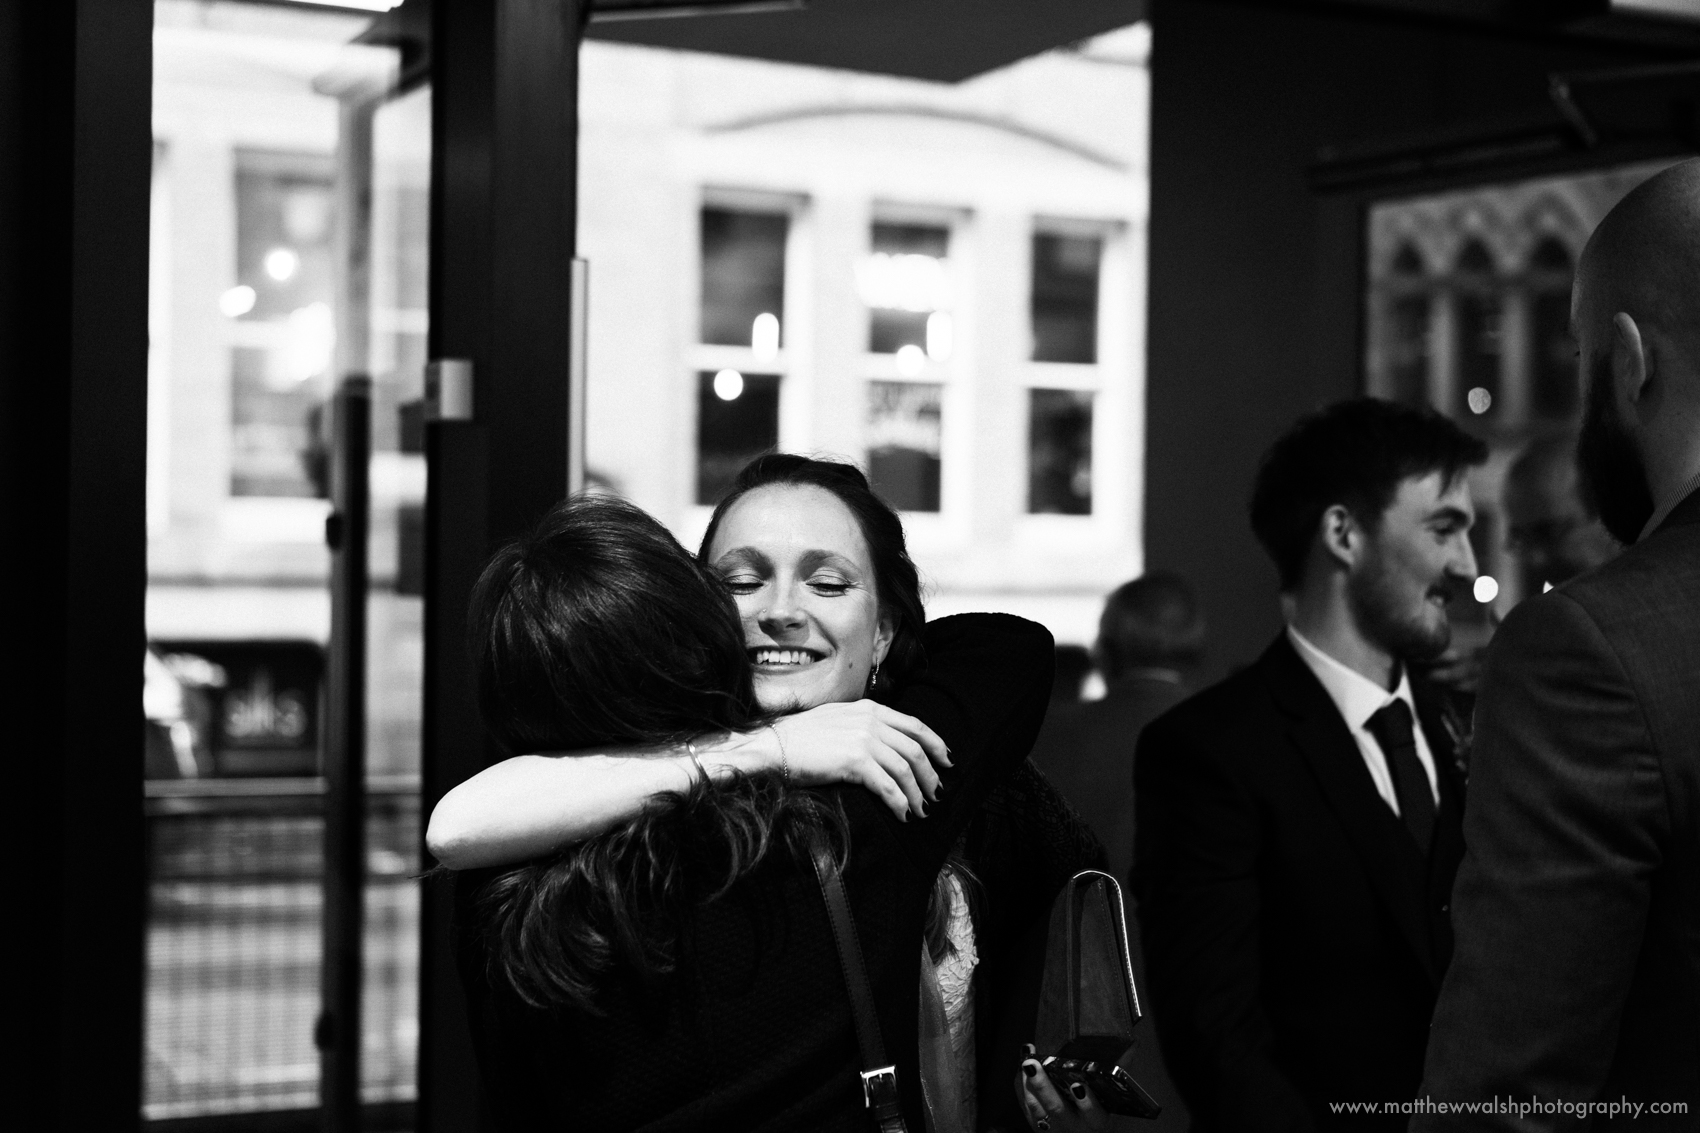 The bride hugs her oldest and best friend